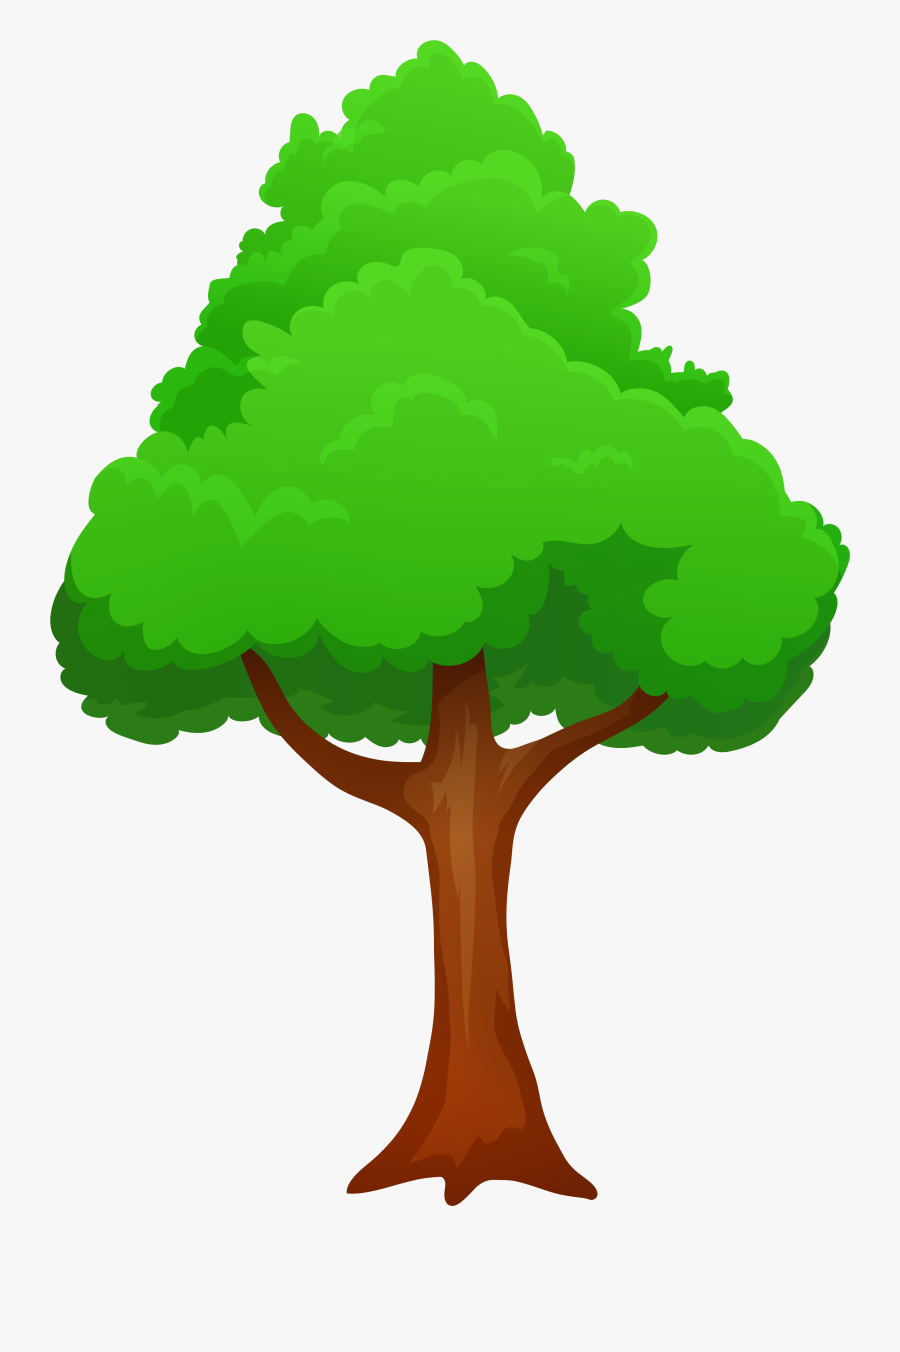 Green Tree Png Clipart - Transparent Background Cartoon Tree, Transparent Clipart